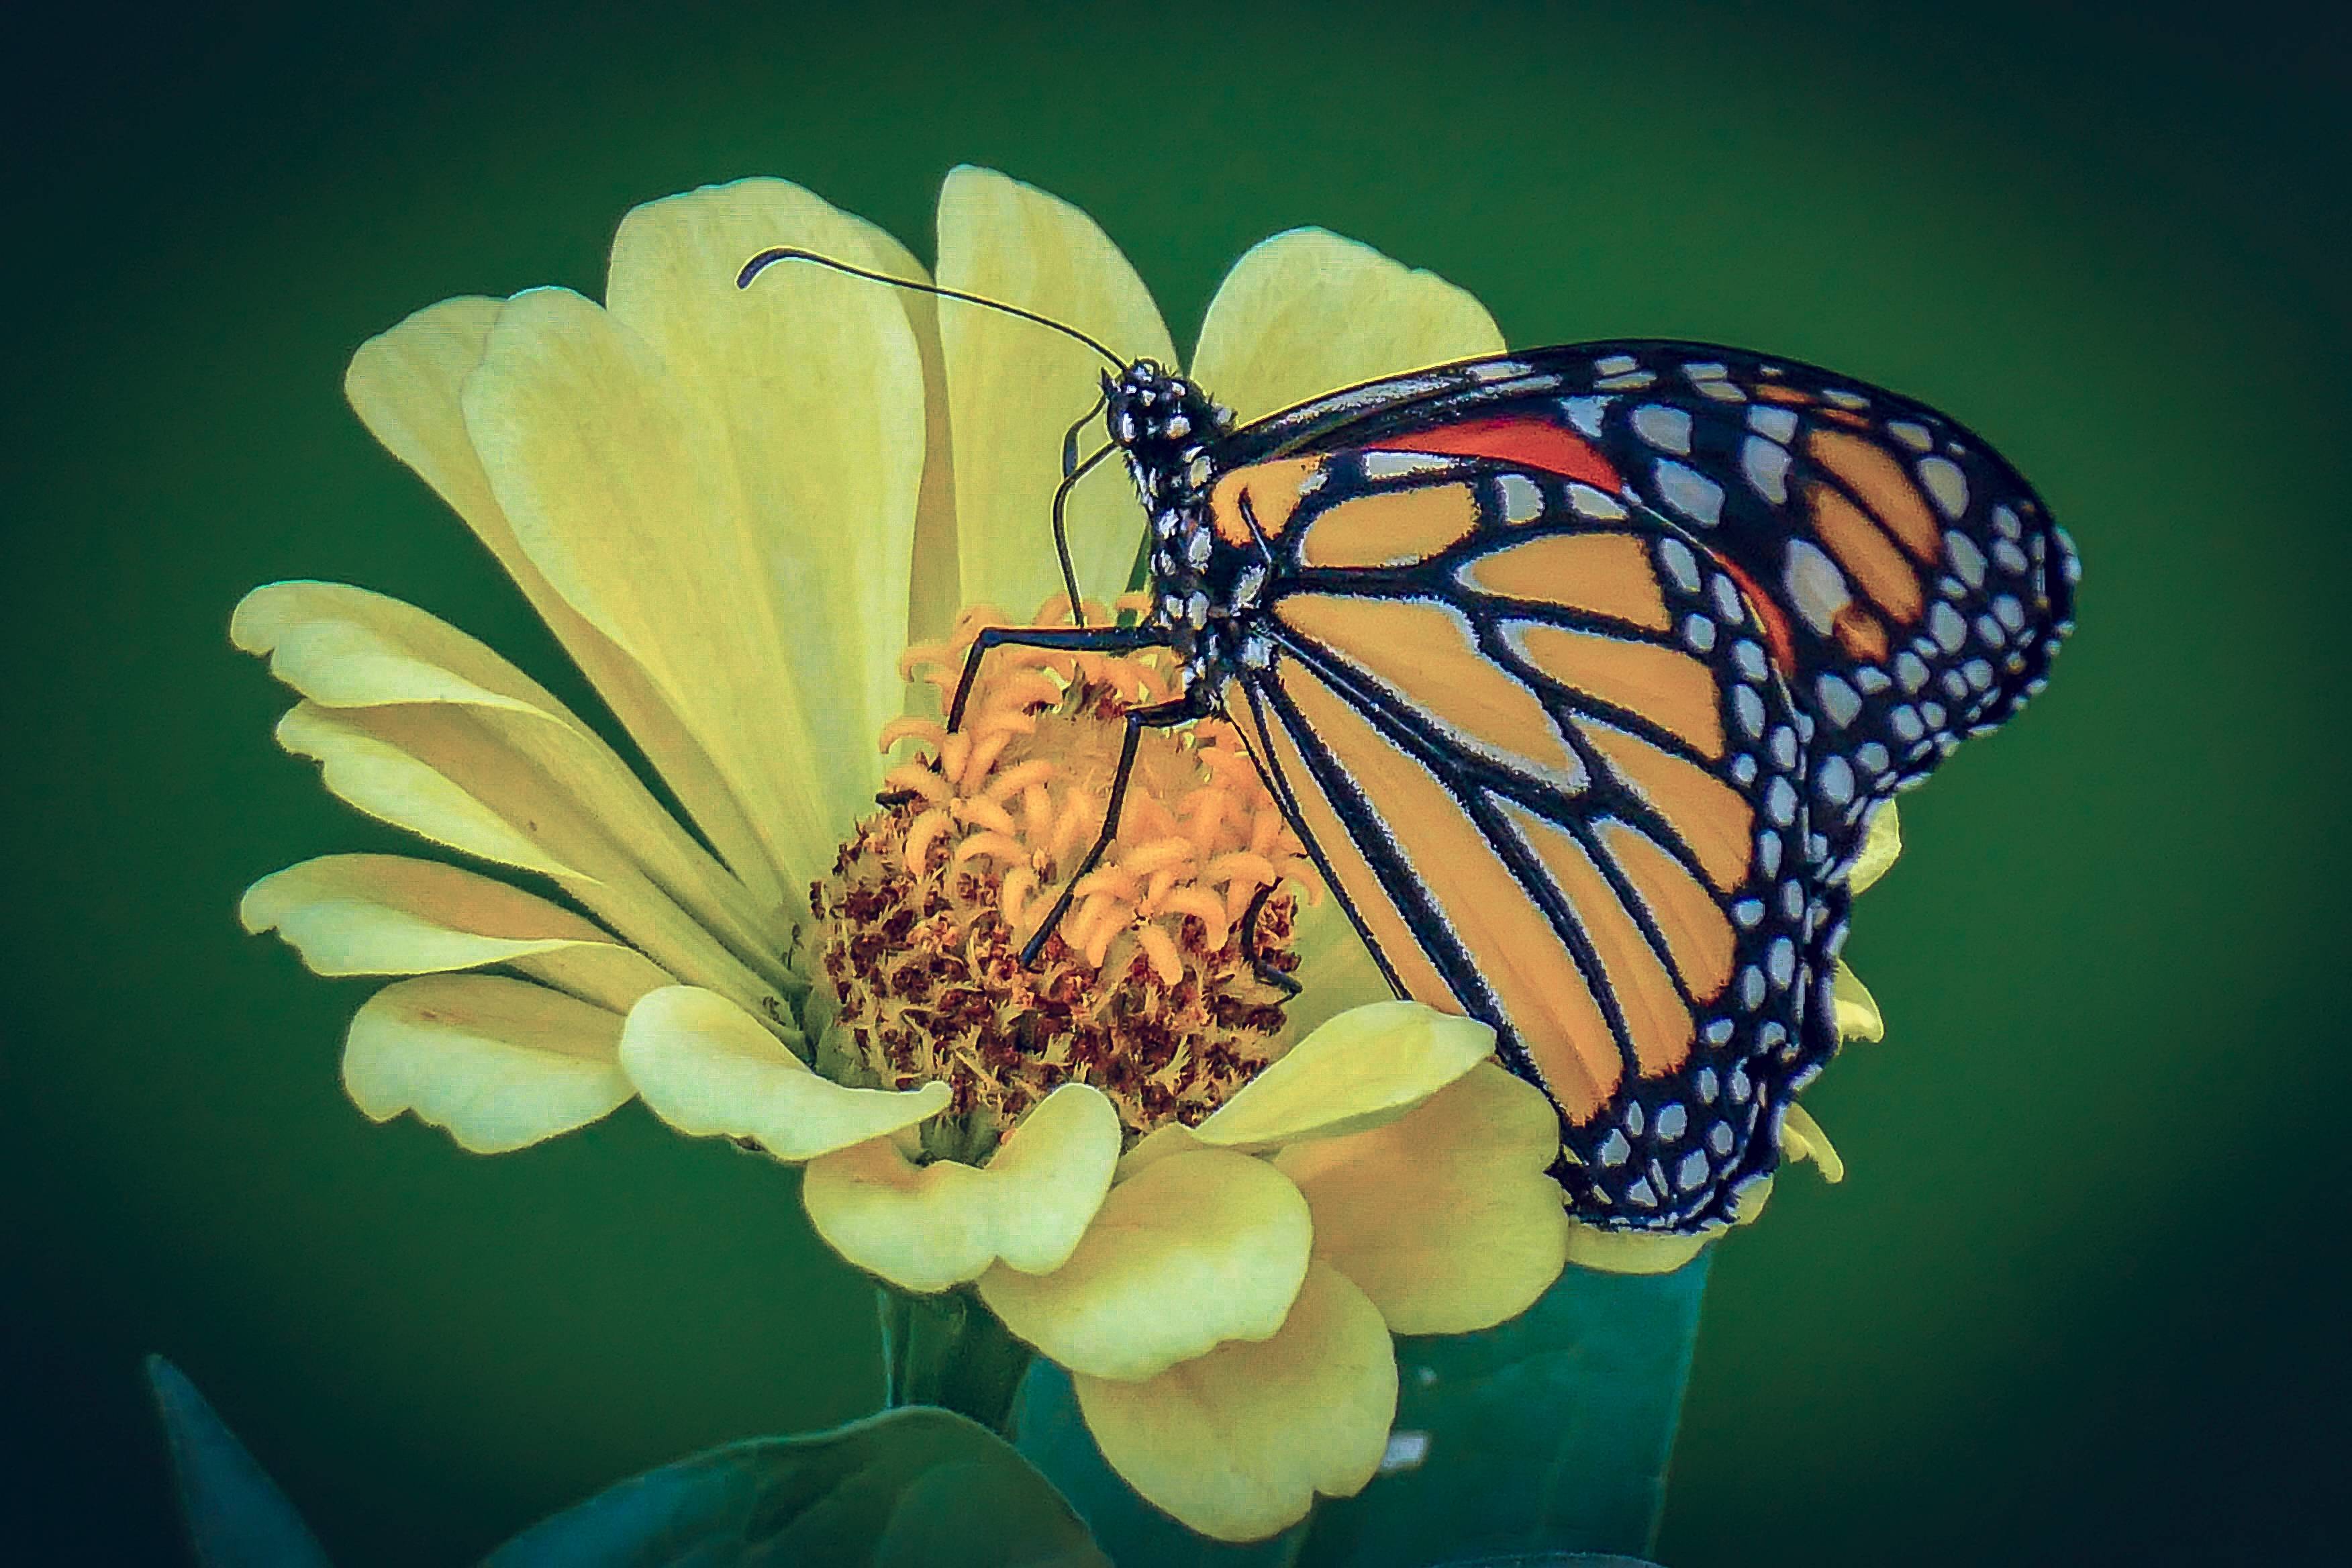 Wallpapers yellow flower butterfly insects on the desktop